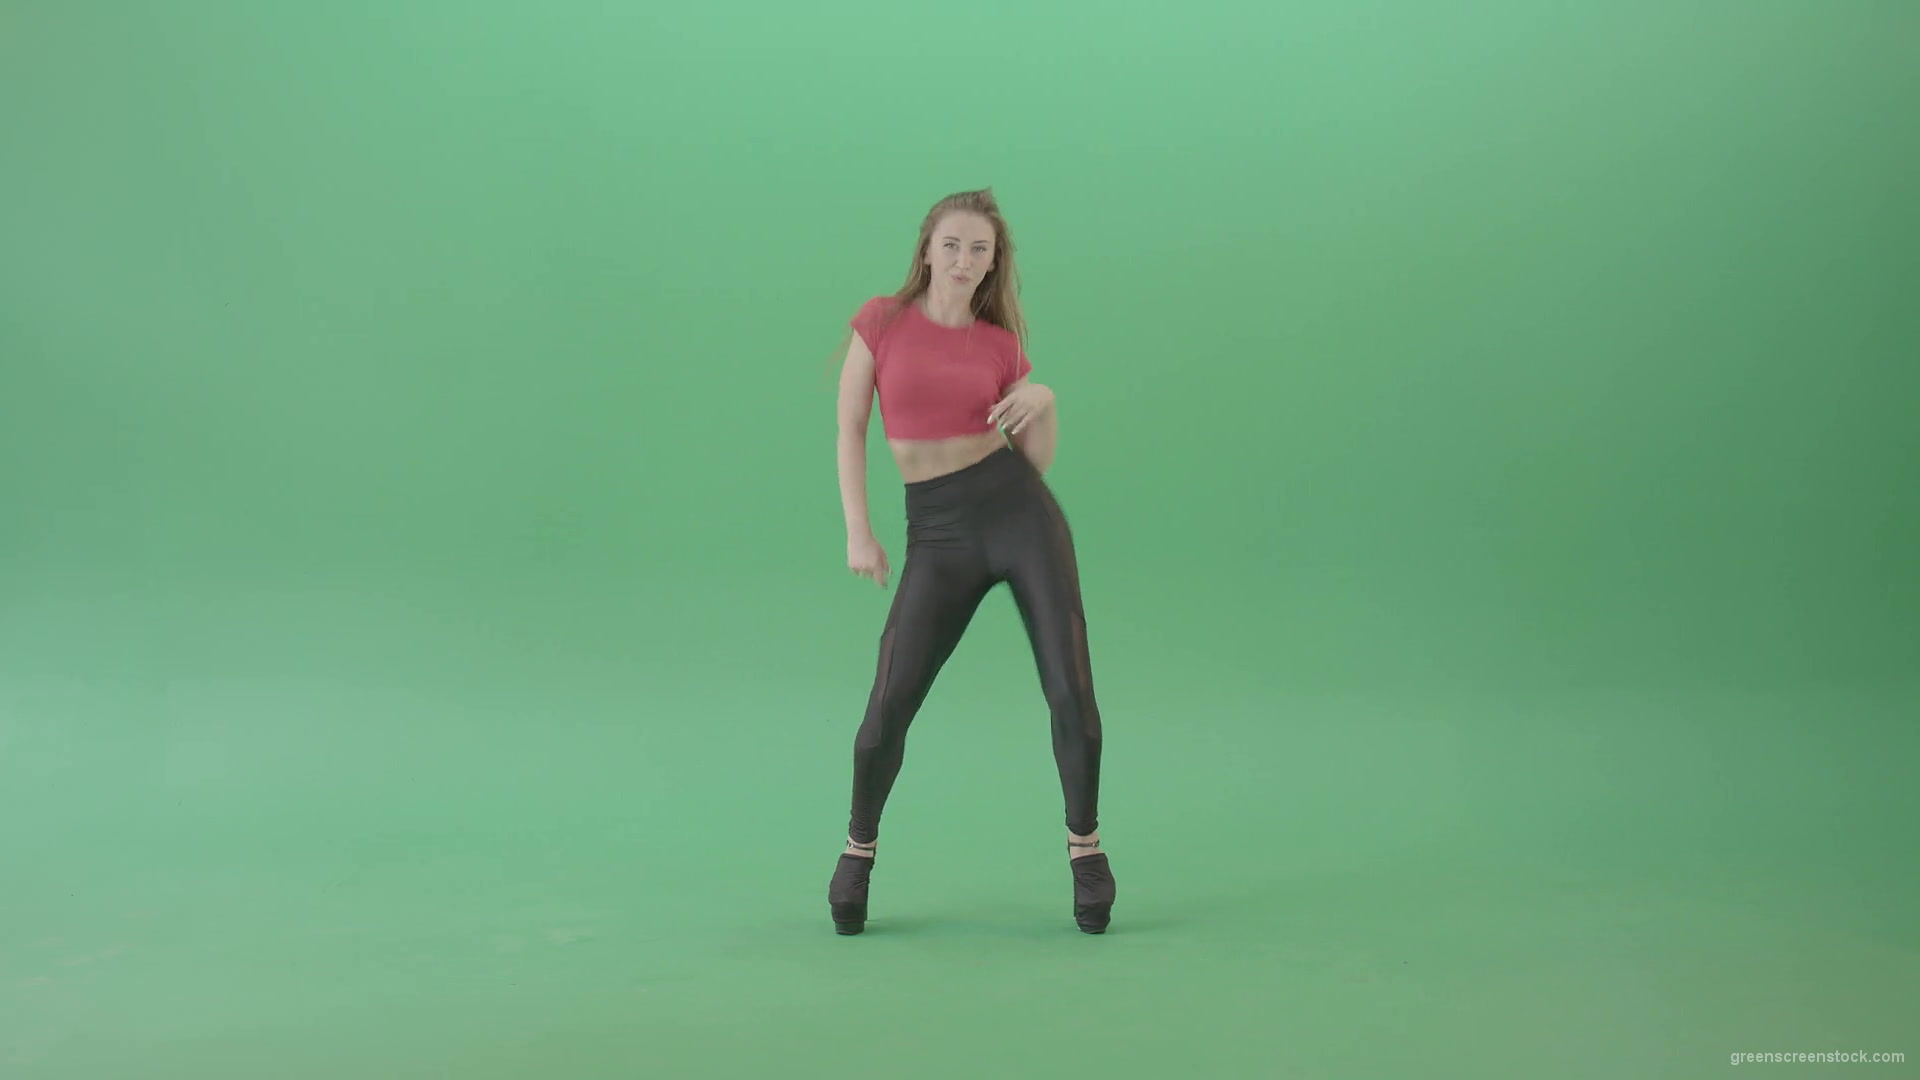 Body-wave-by-strip-dance-girl-on-green-screen-chromakey-4K-Video-Footage-1920_006 Green Screen Stock